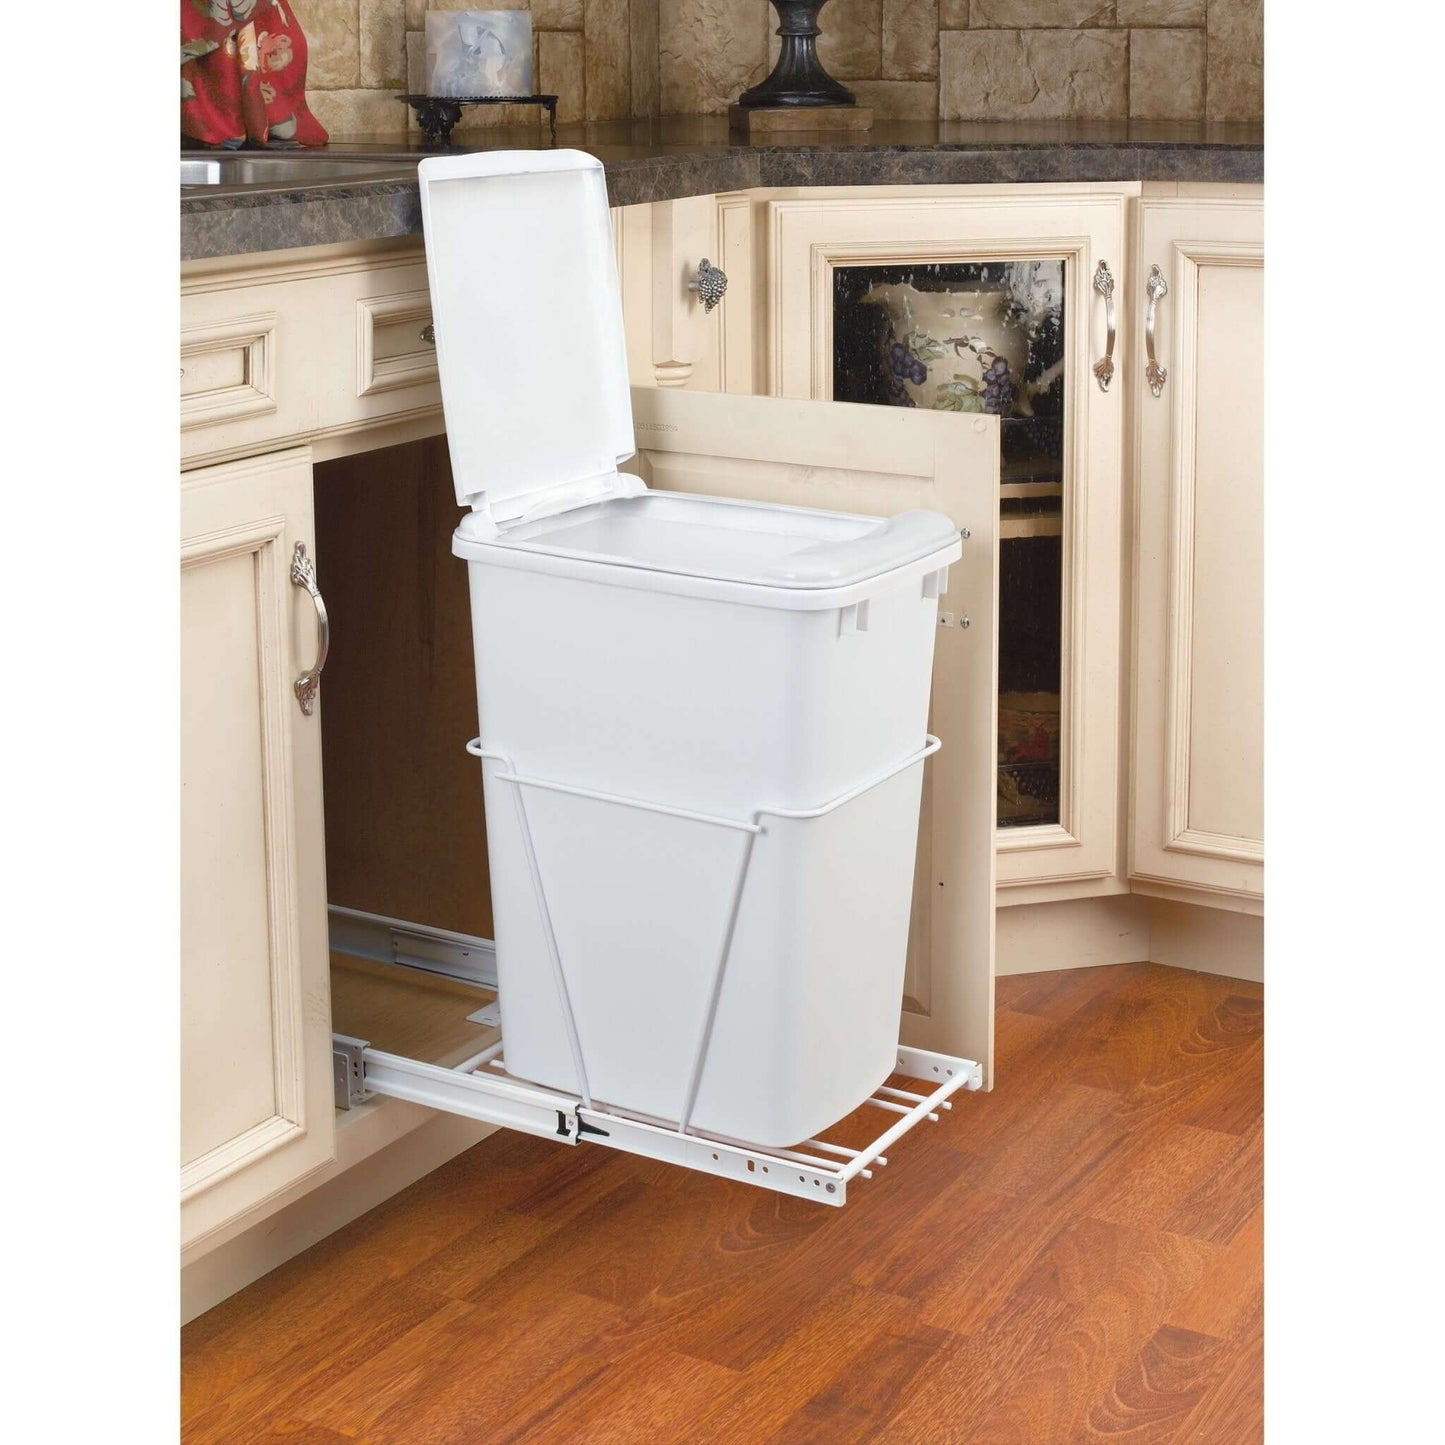 Rev-A-Shelf - White Steel Pull Out Waste/Trash Container w/included lid - RV-12PB-L